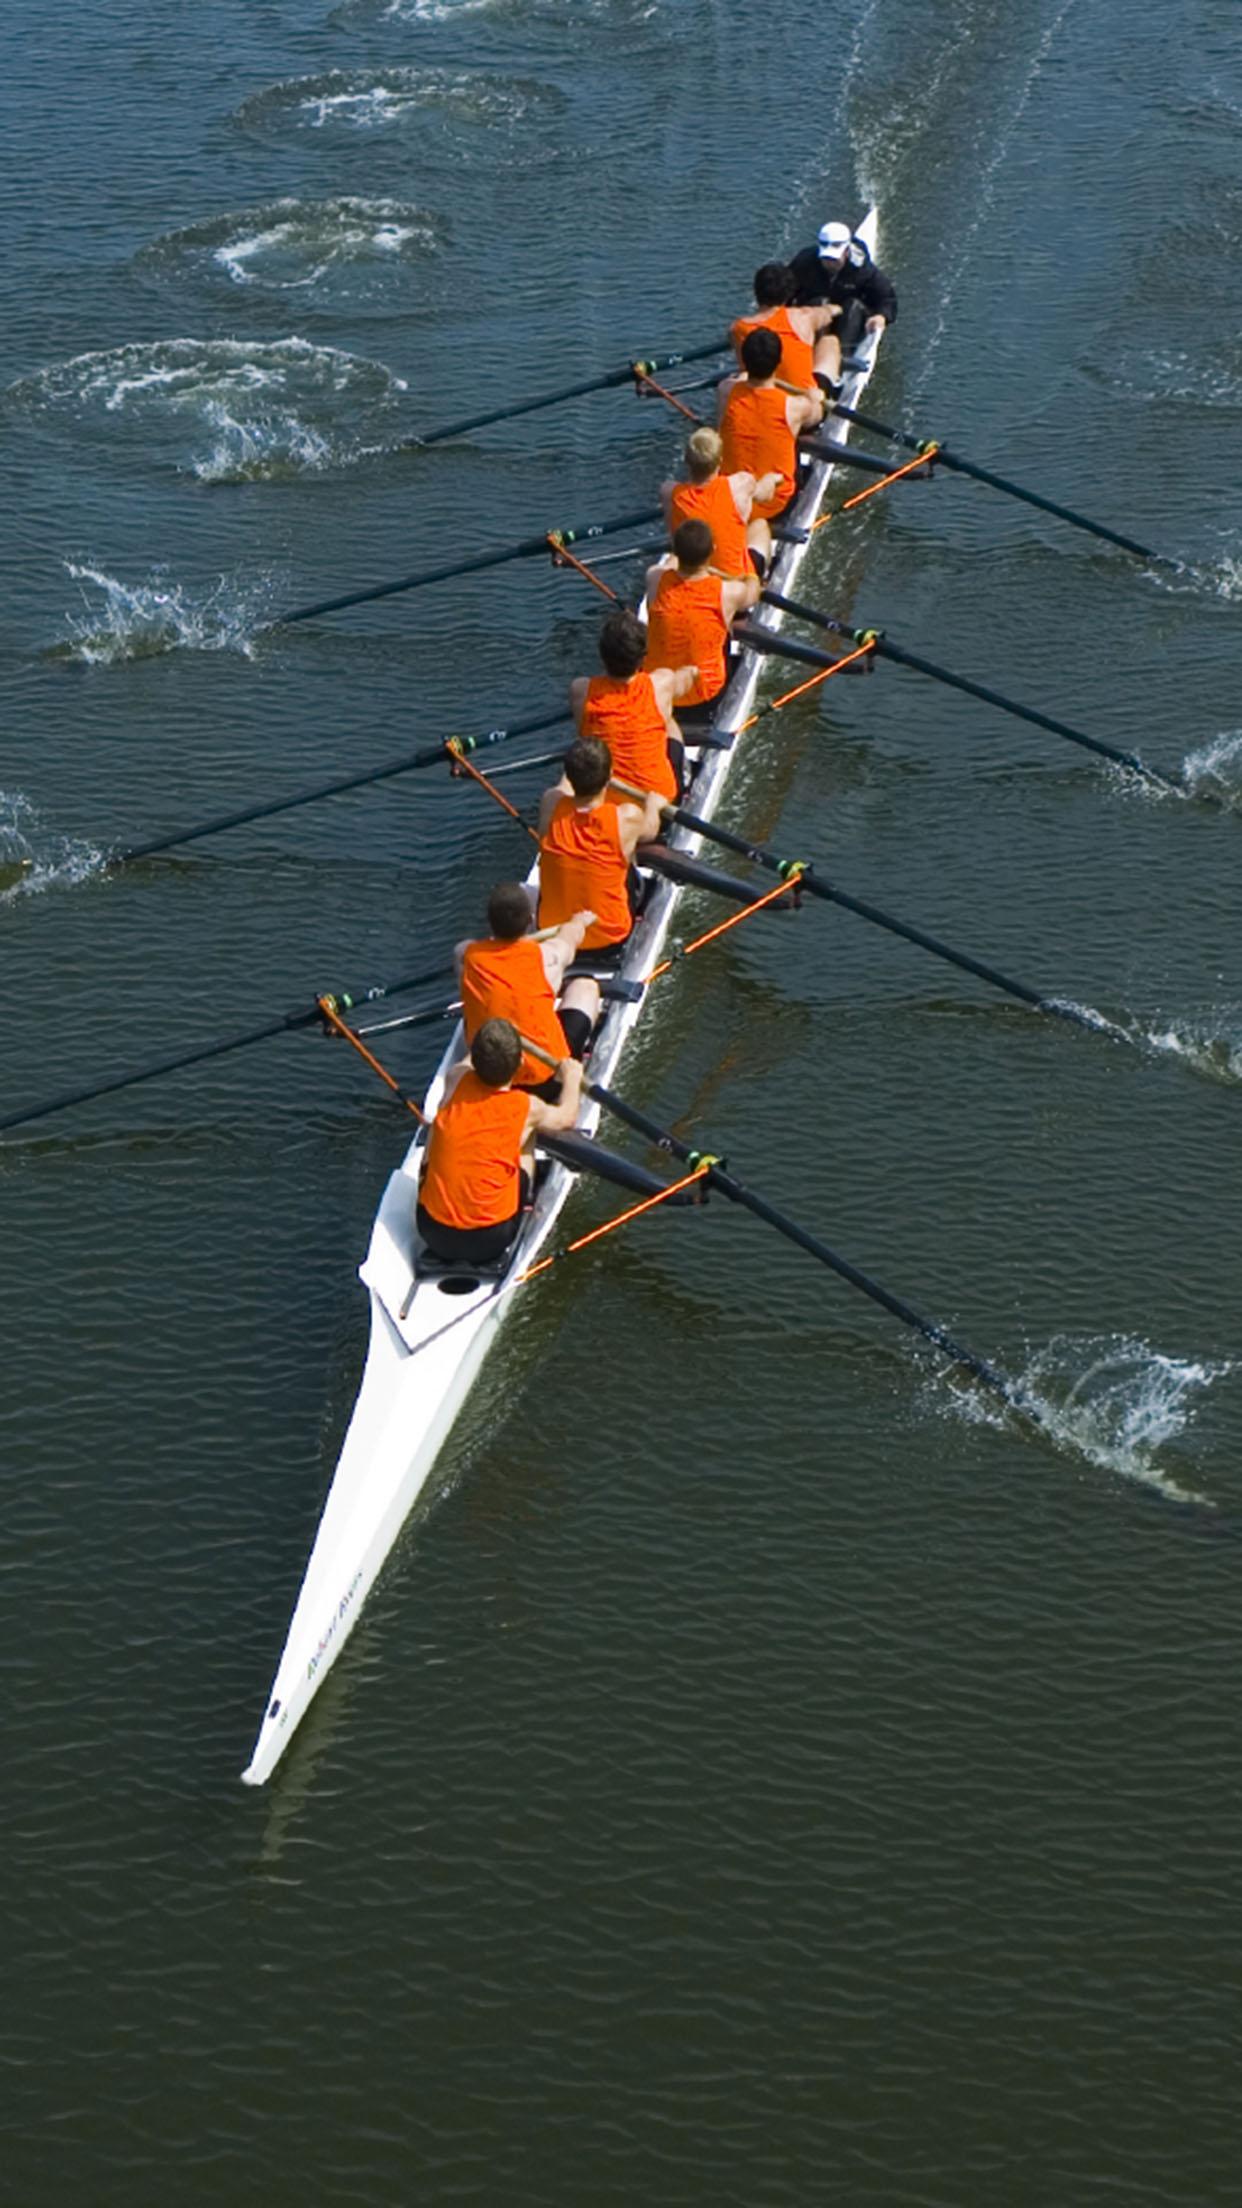 Rowing 2 Wallpaper for iPhone X, 6